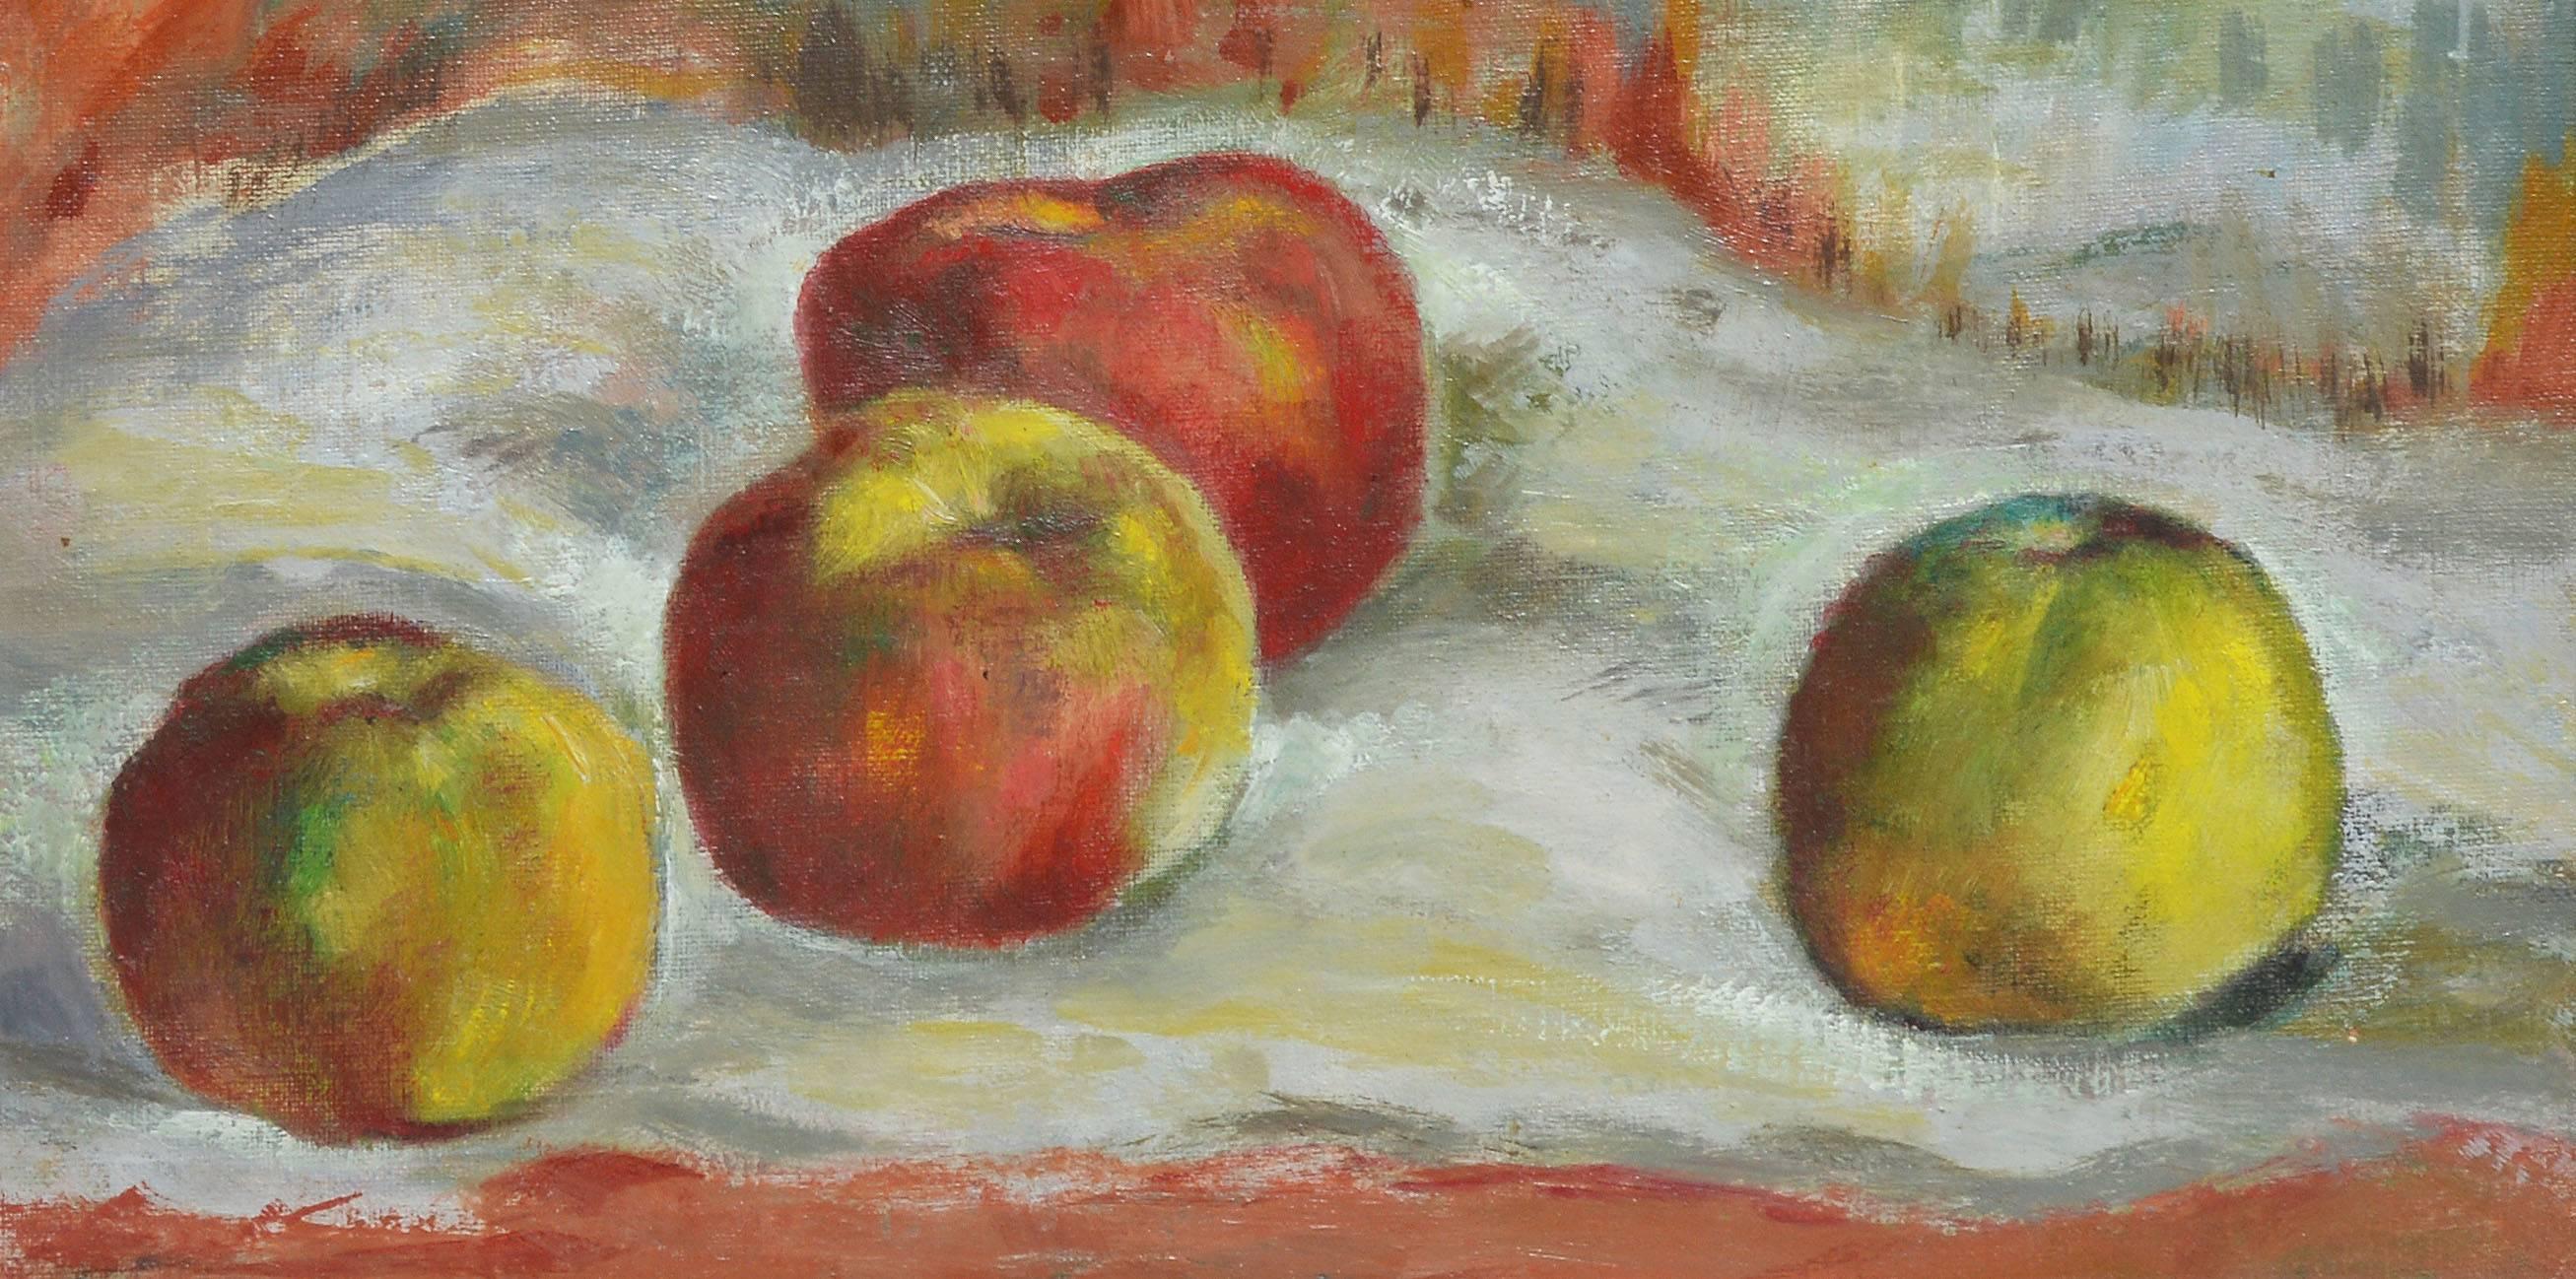 Modernist apple still life painting.  Oil on board, circa 1940.  Unsigned.  Displayed in a period modernist frame.  Image size, 14"L x 11"H, overall 19"L x 16"H.